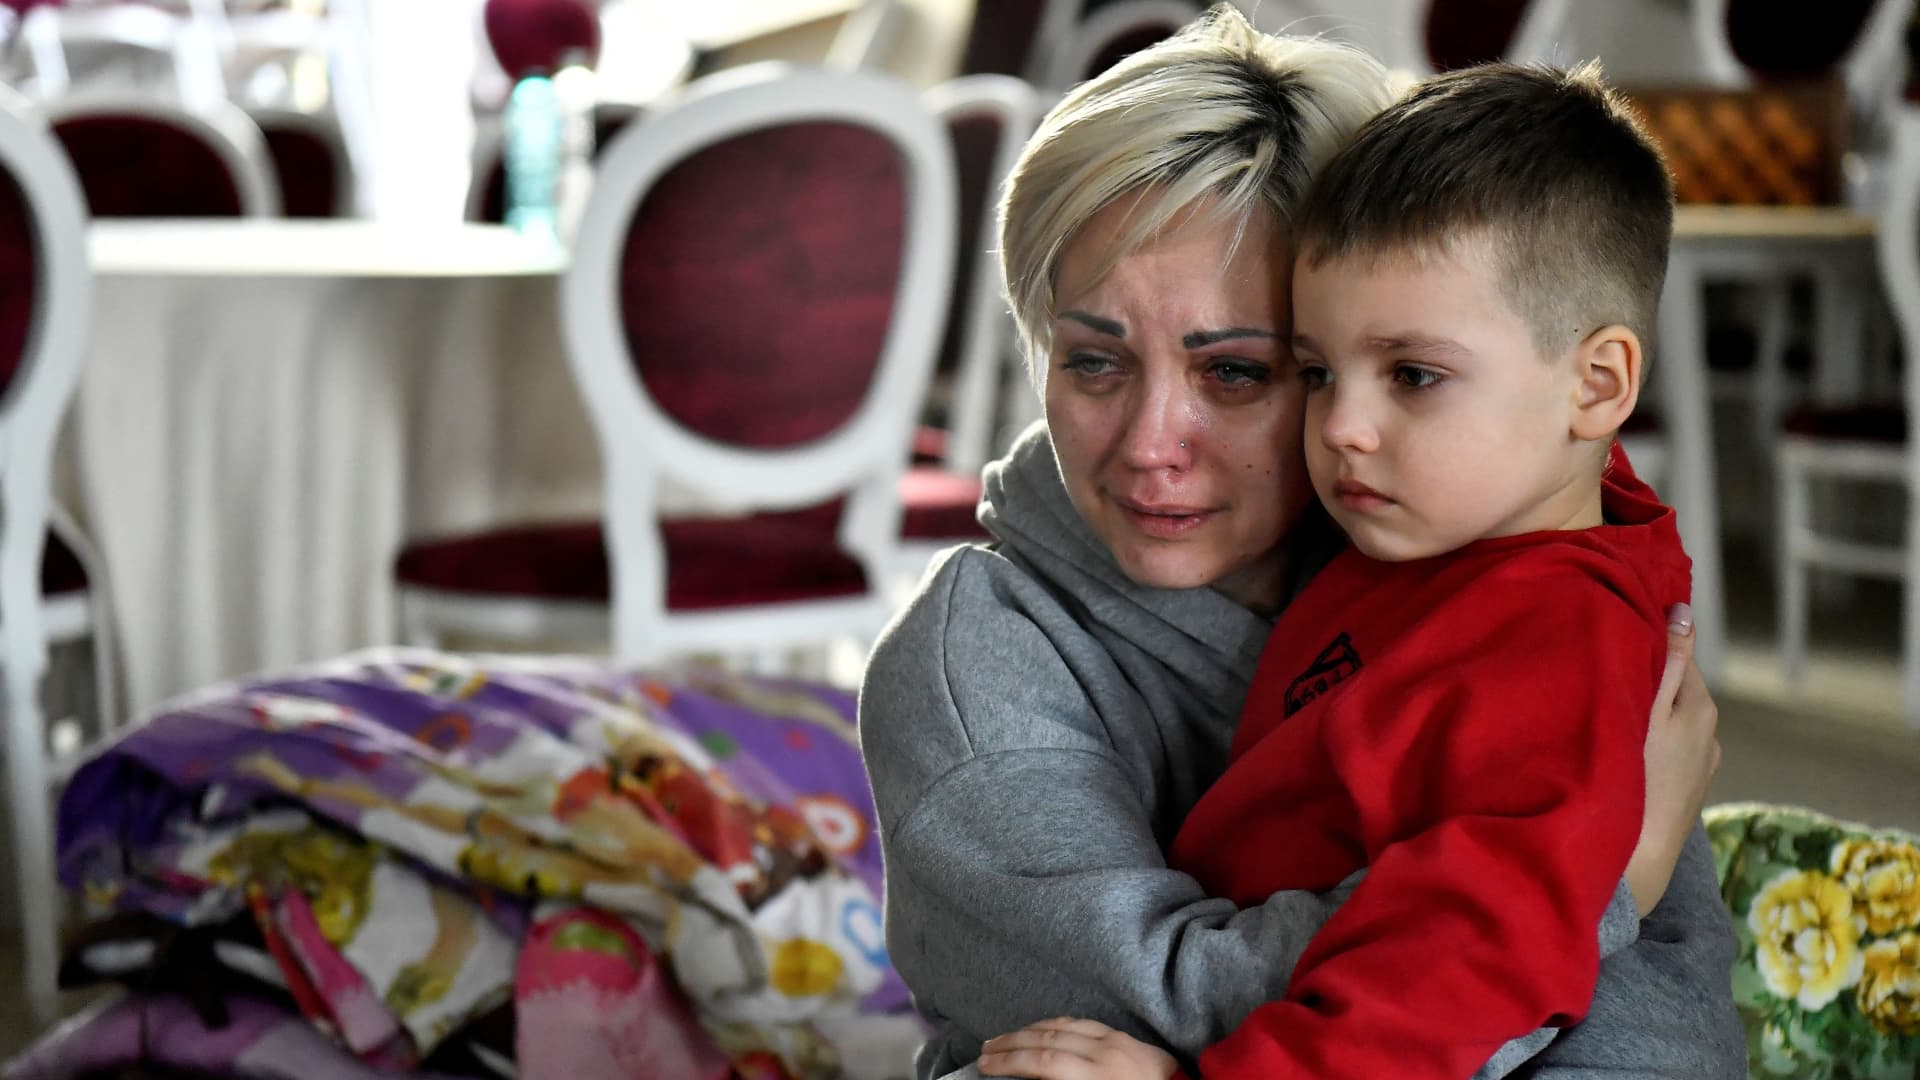 Egor, 5, comforts his mother Helen Yakubets who cries in a ballroom, which has been converted to a temporary shelter, at the Mandachi hotel after fleeing from Chernihiv in Ukraine to Romania, following Russia's invasion of Ukraine, at the border crossing in Suceava, Romania, March 20, 2022. Her 18 year old son and husband remain in Ukraine to fight.